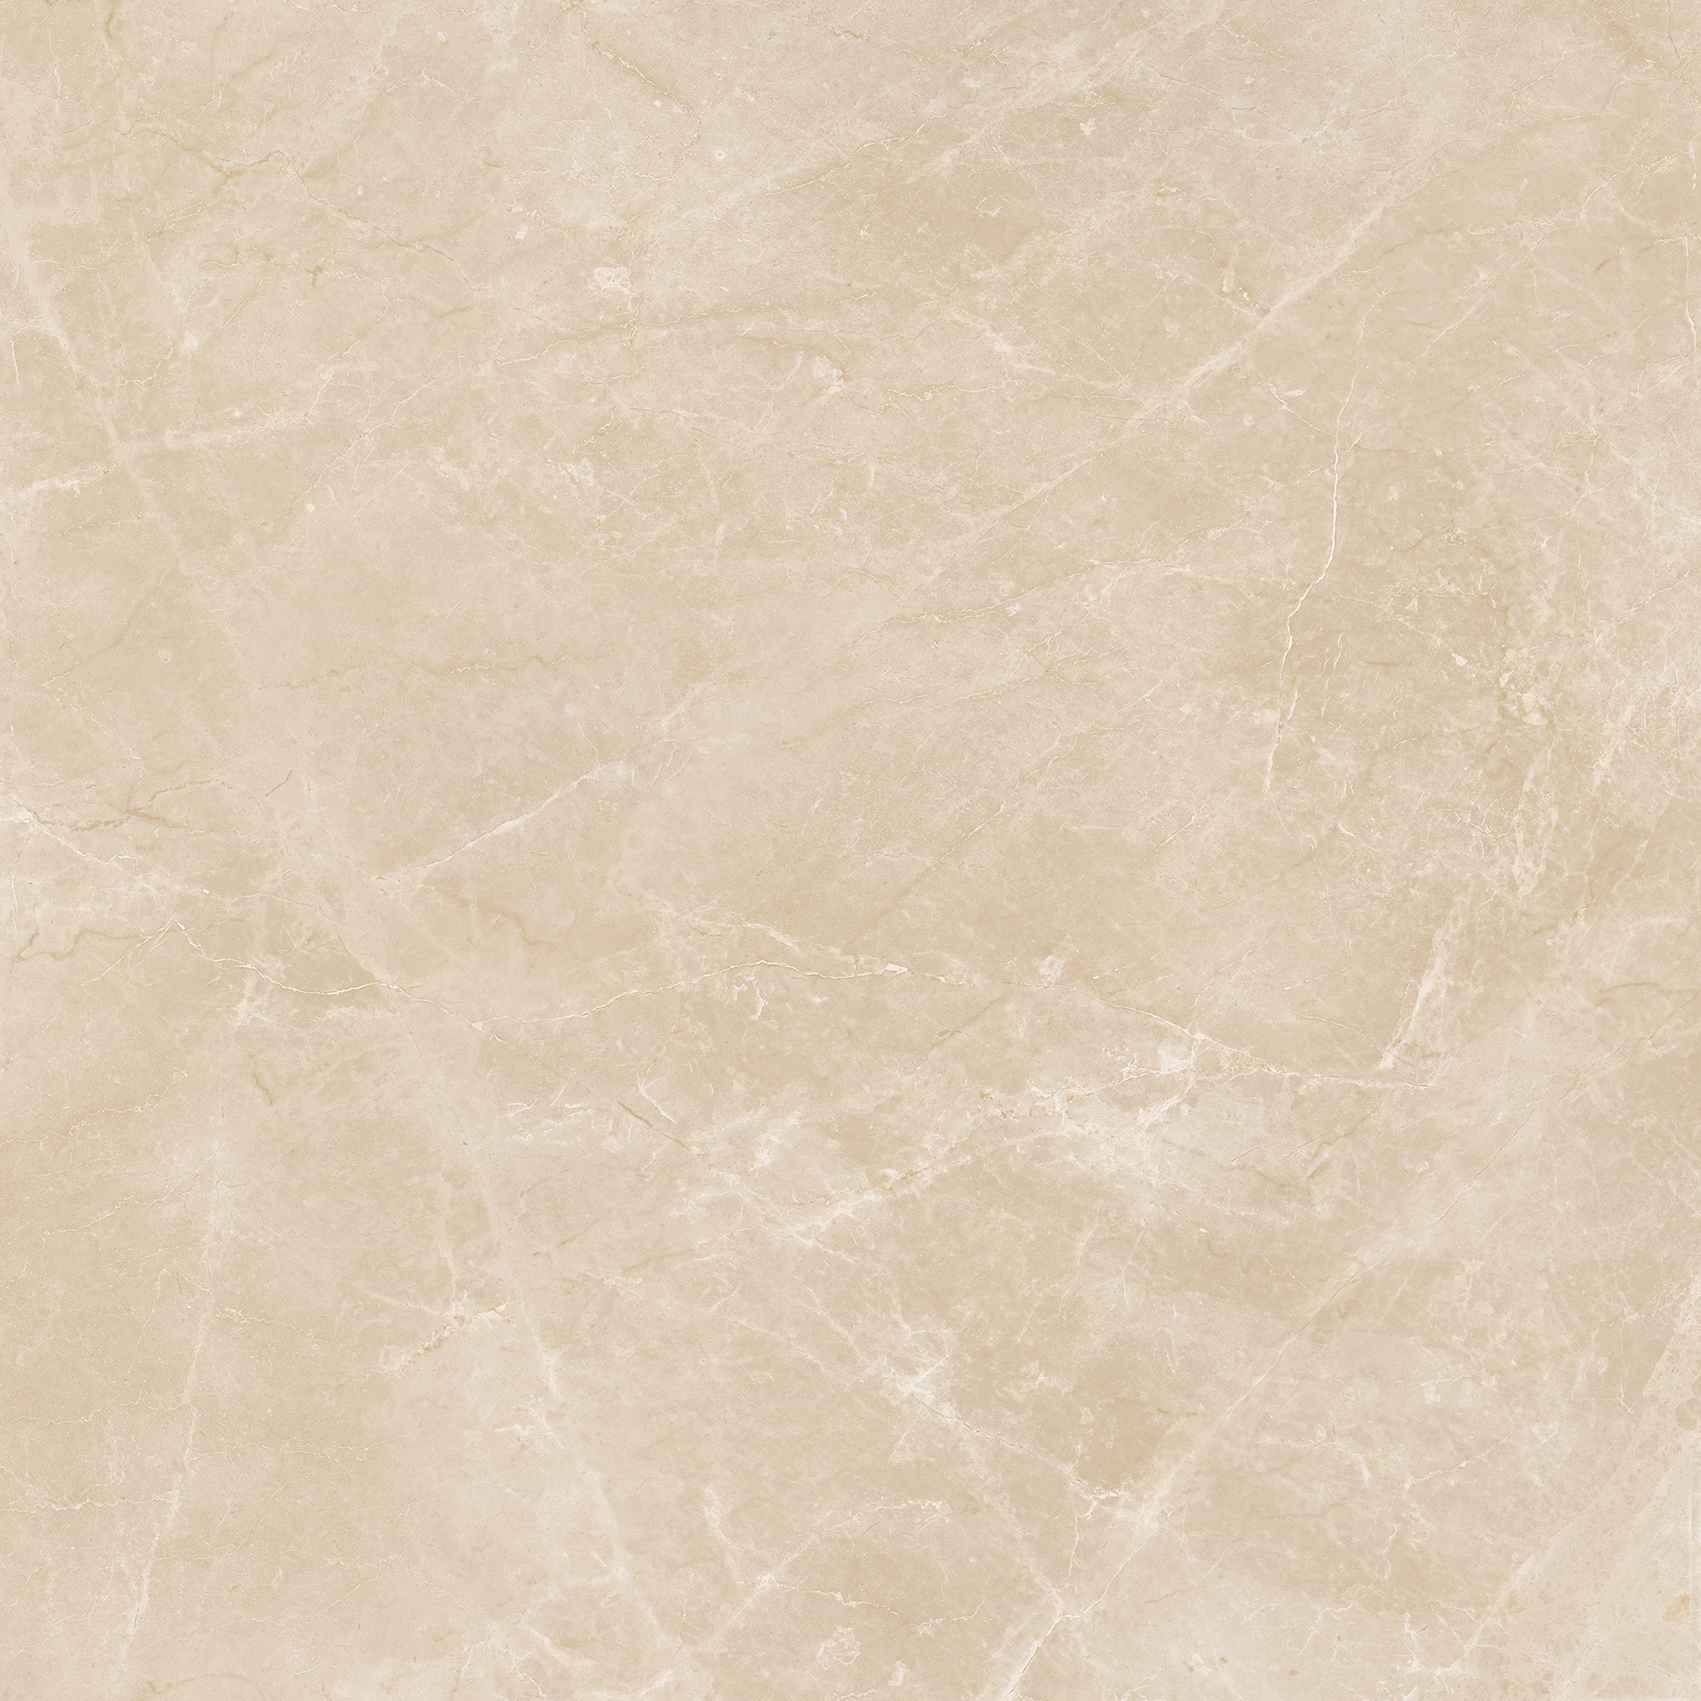 Lovetiles Marble Beige Polished B6150051002K polished 60x60cm rectified 9mm